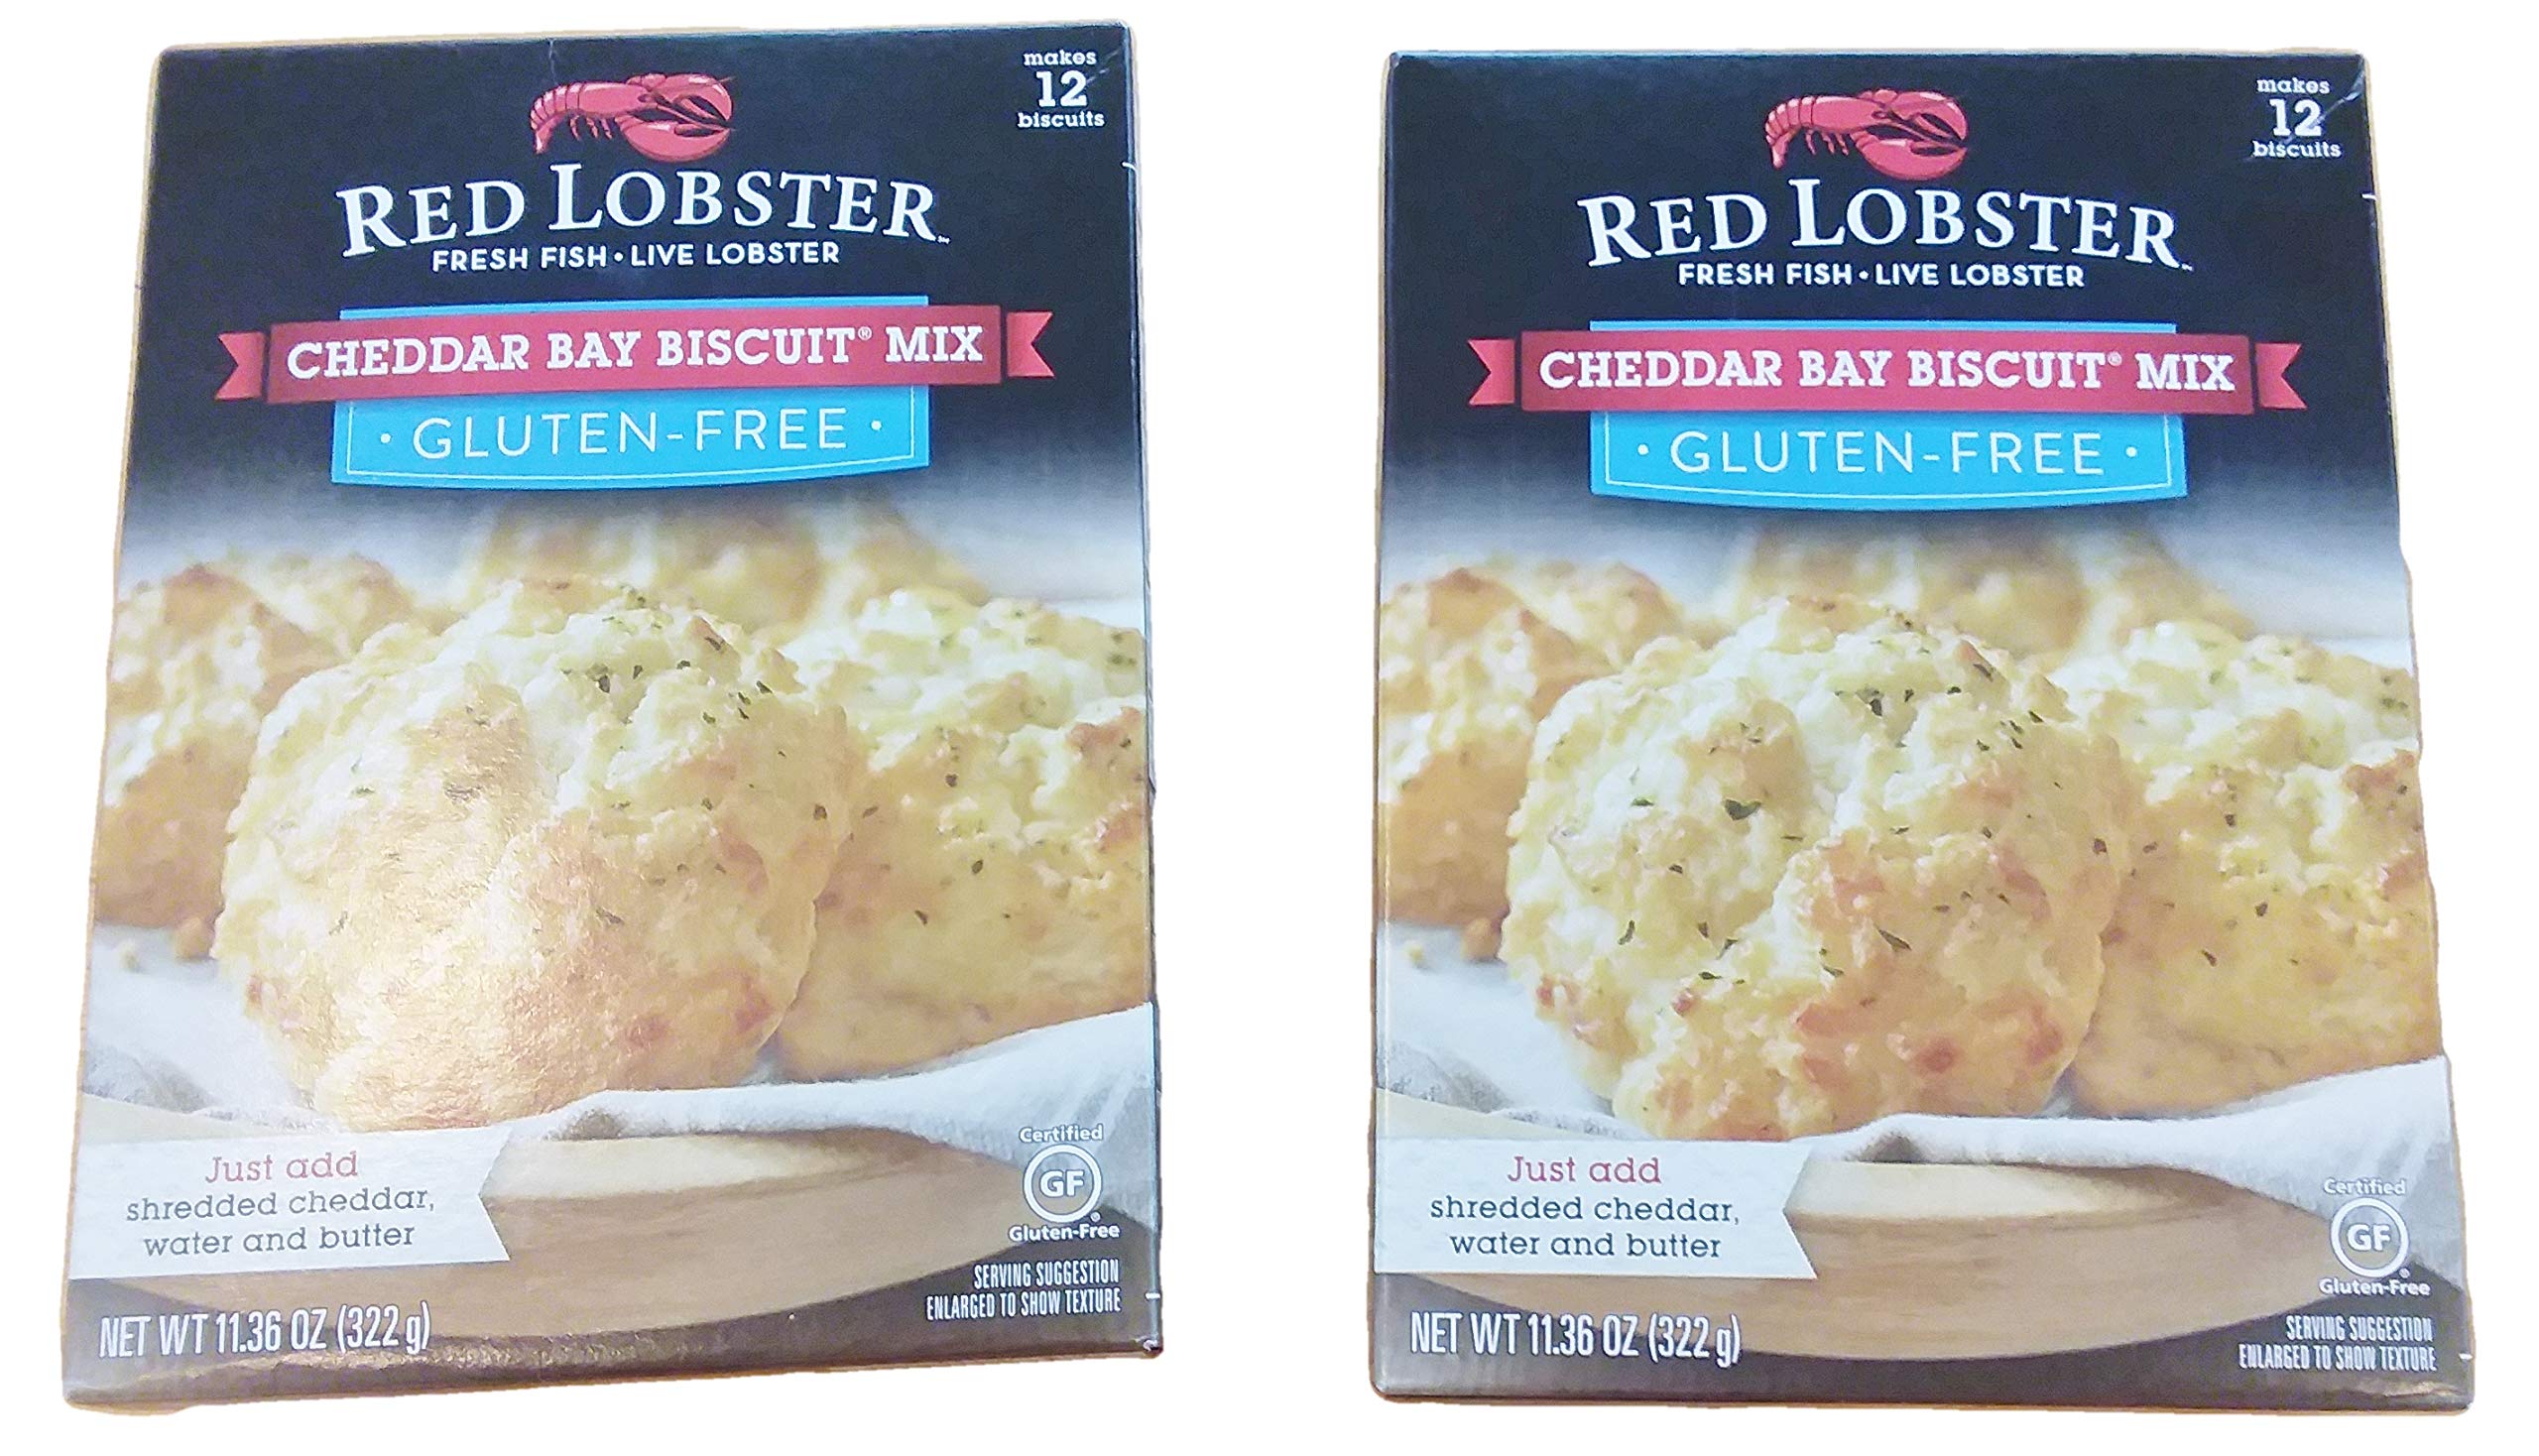 Red Lobster Cheddar Bay Biscuit Mix (Pack of 2) 11.36 Ounce (Pack of 2) 